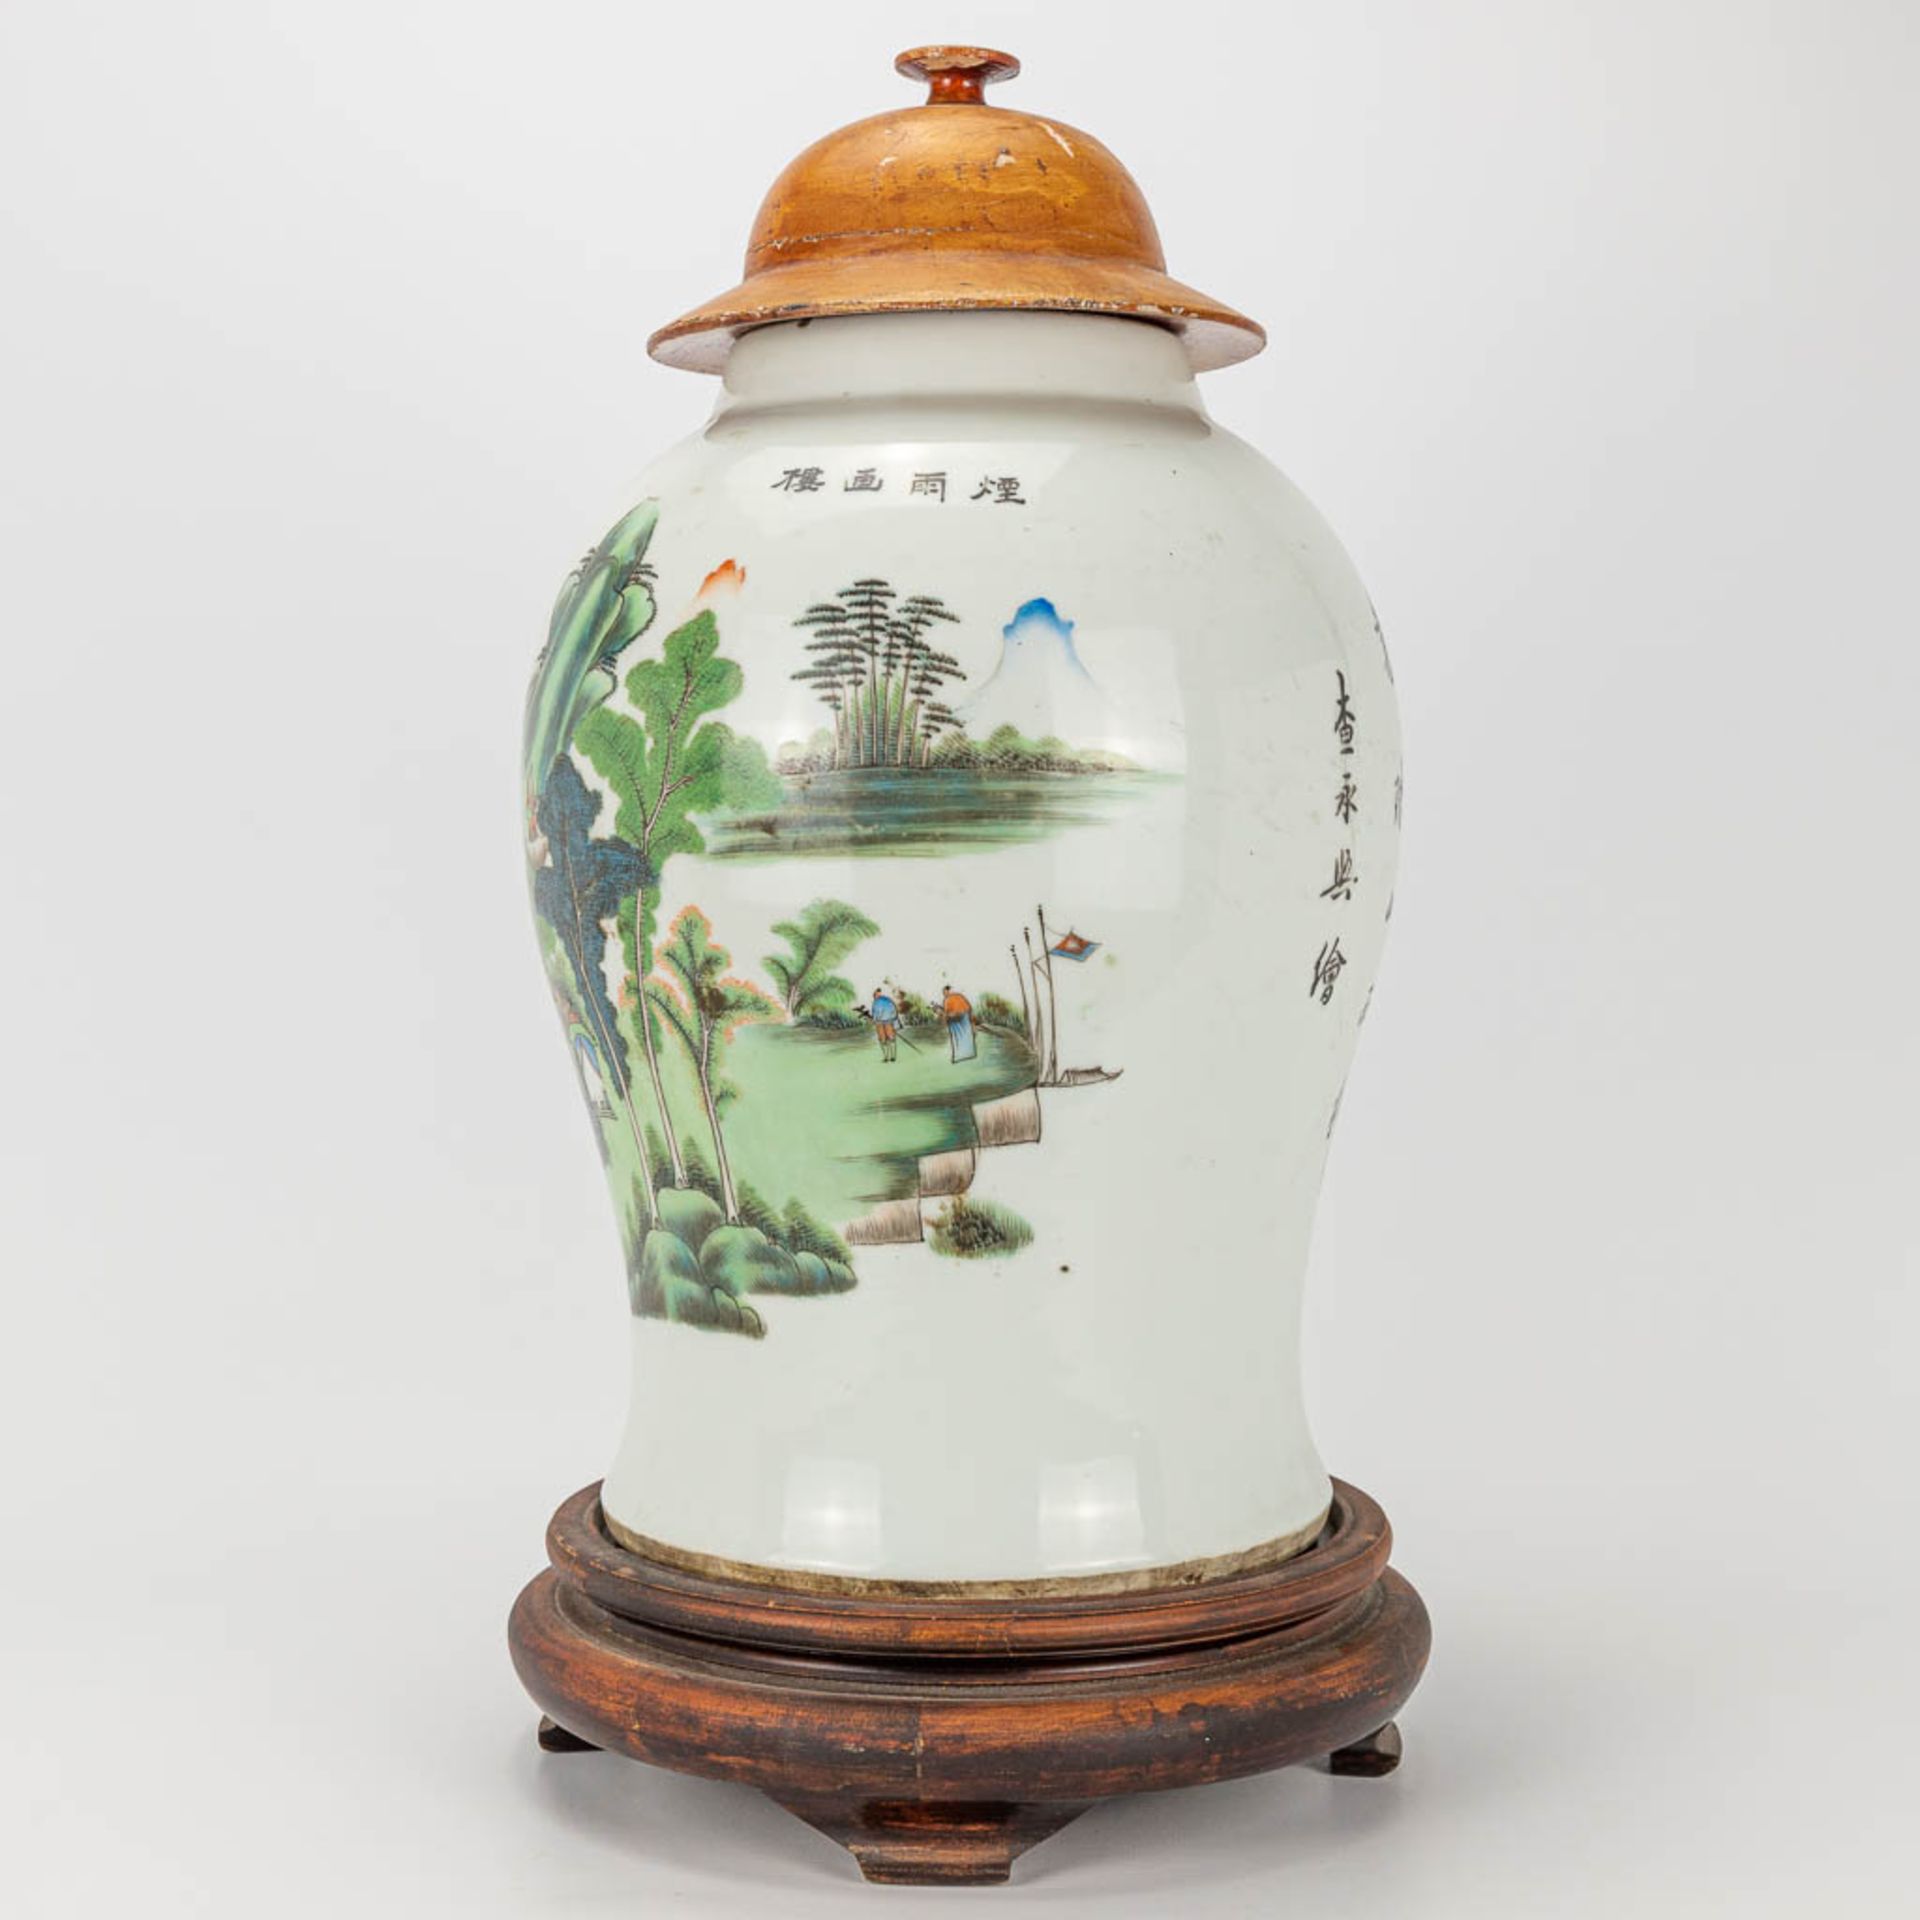 A vase with lid made of Chinese porcelain and decorated with landscapes - Image 5 of 19